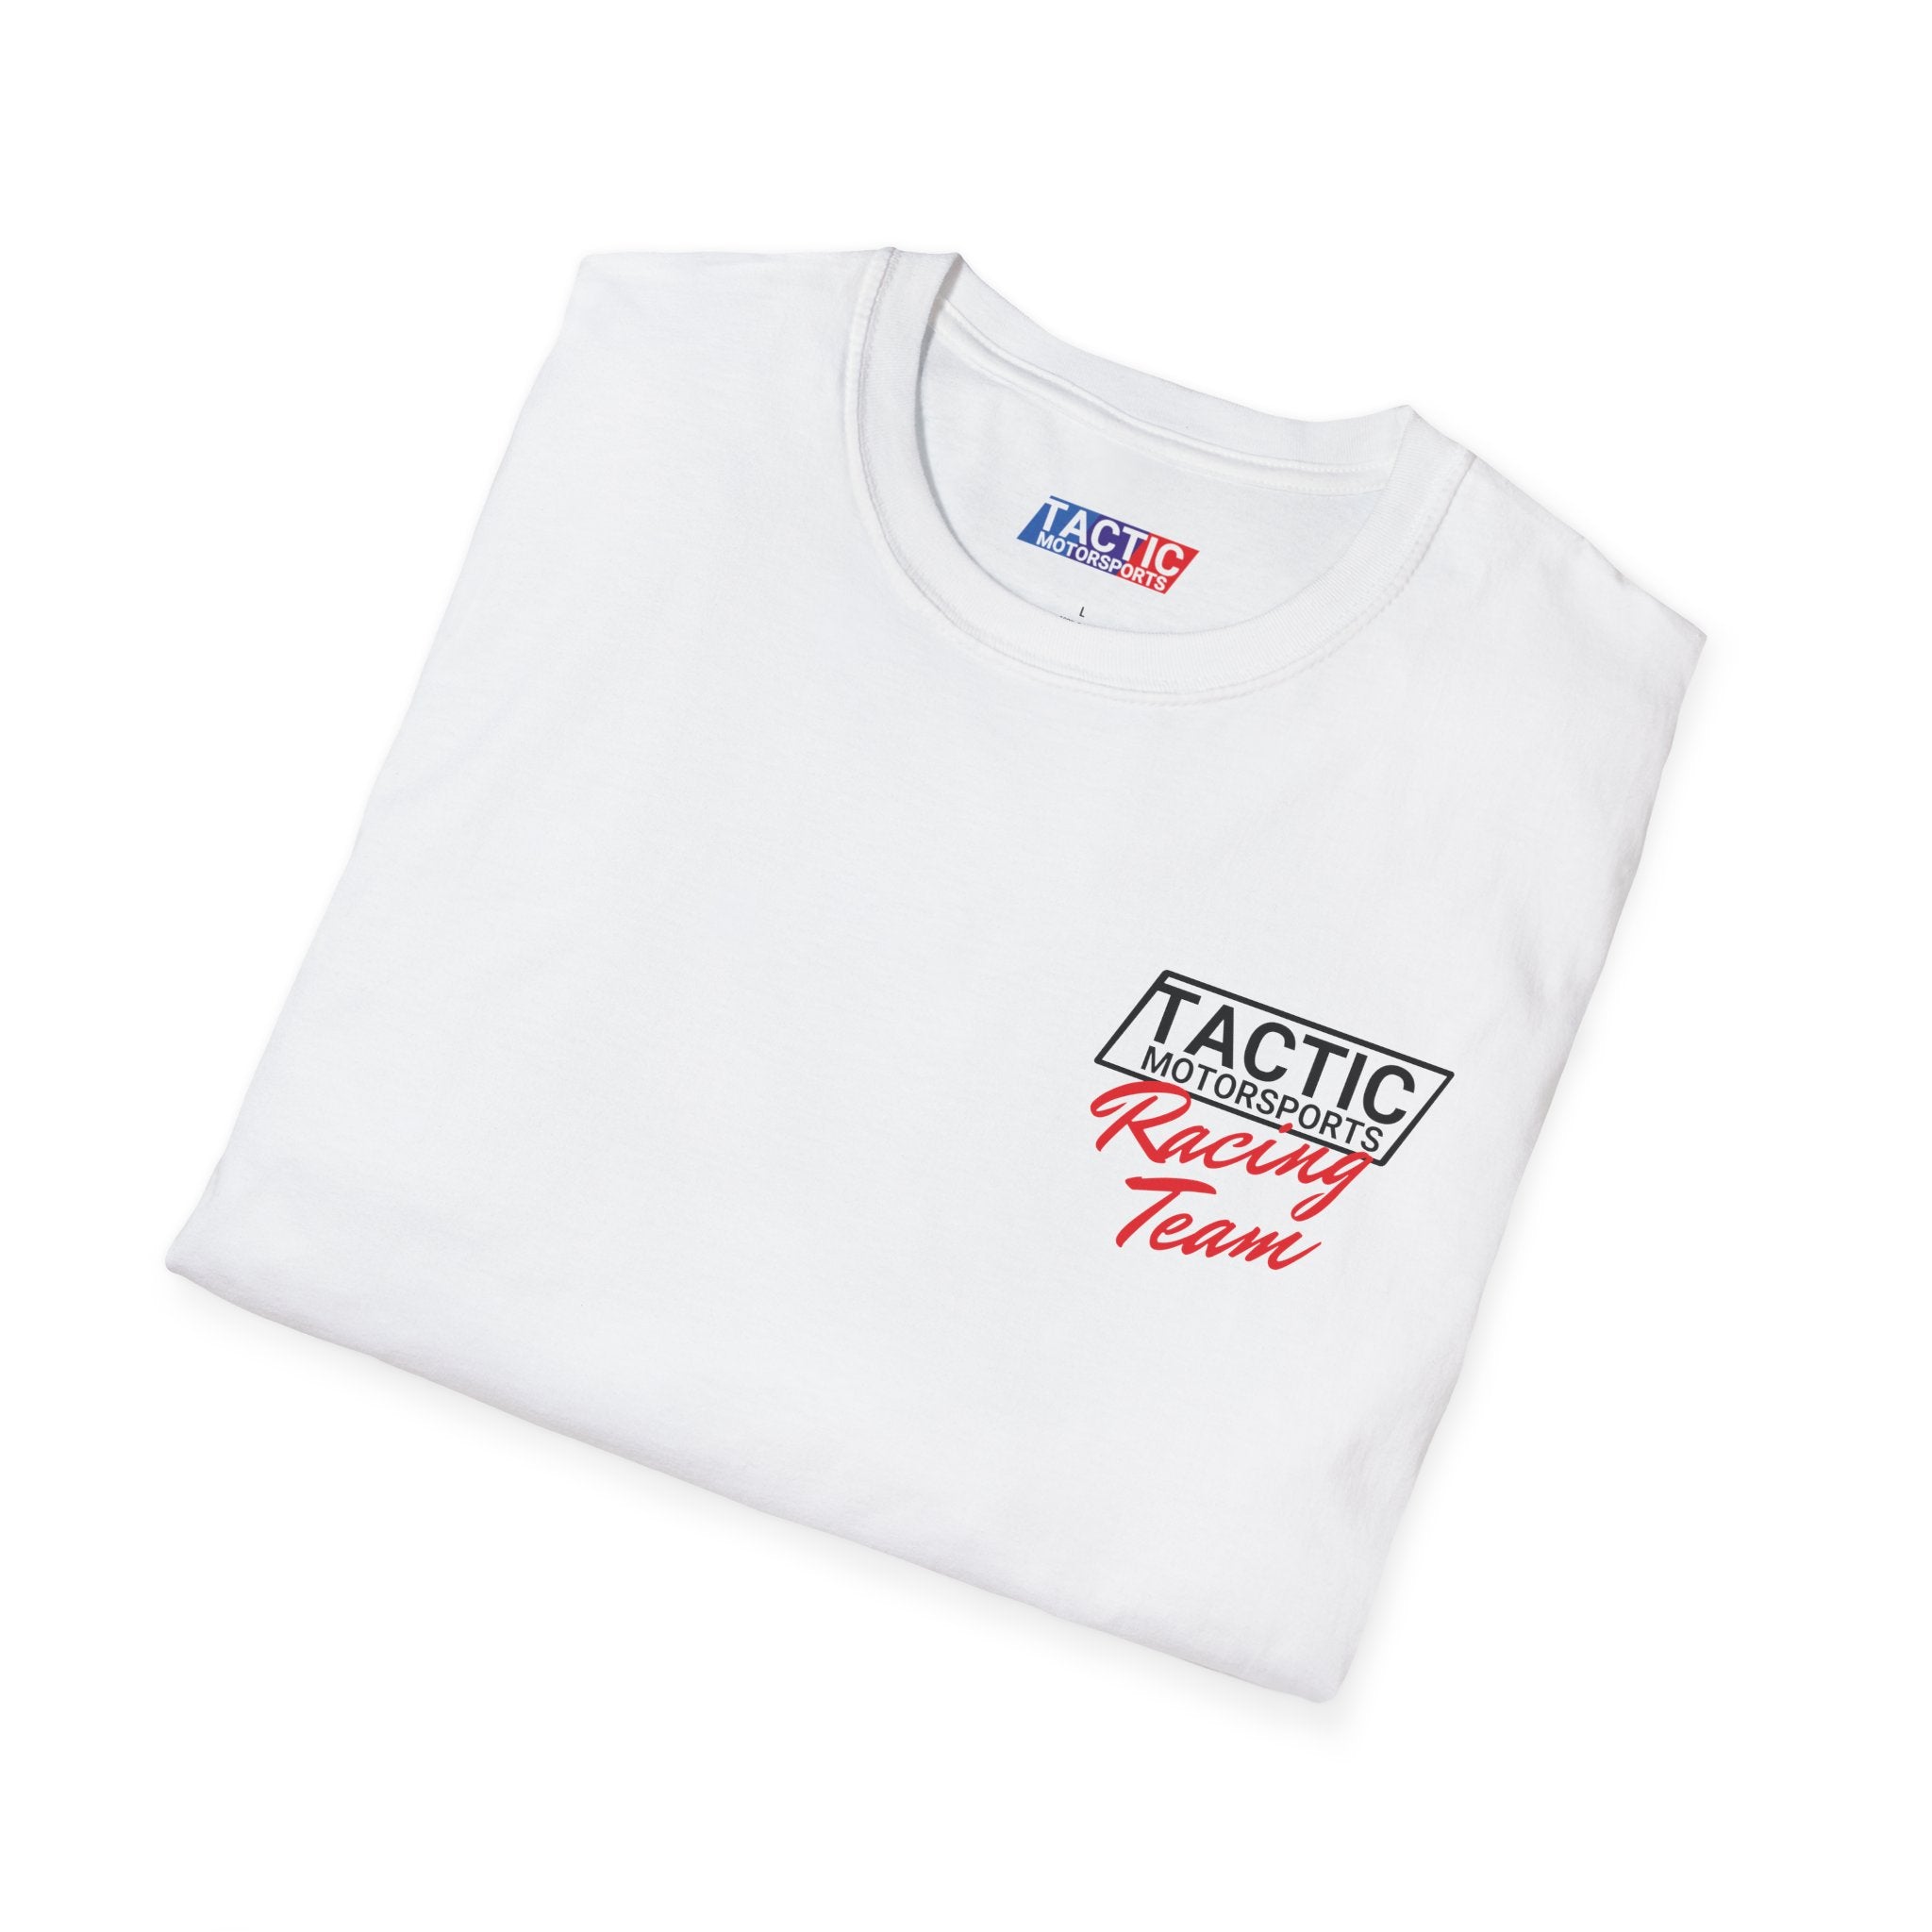 Tactic Motorsports Racing Team White Softstyle T-Shirt